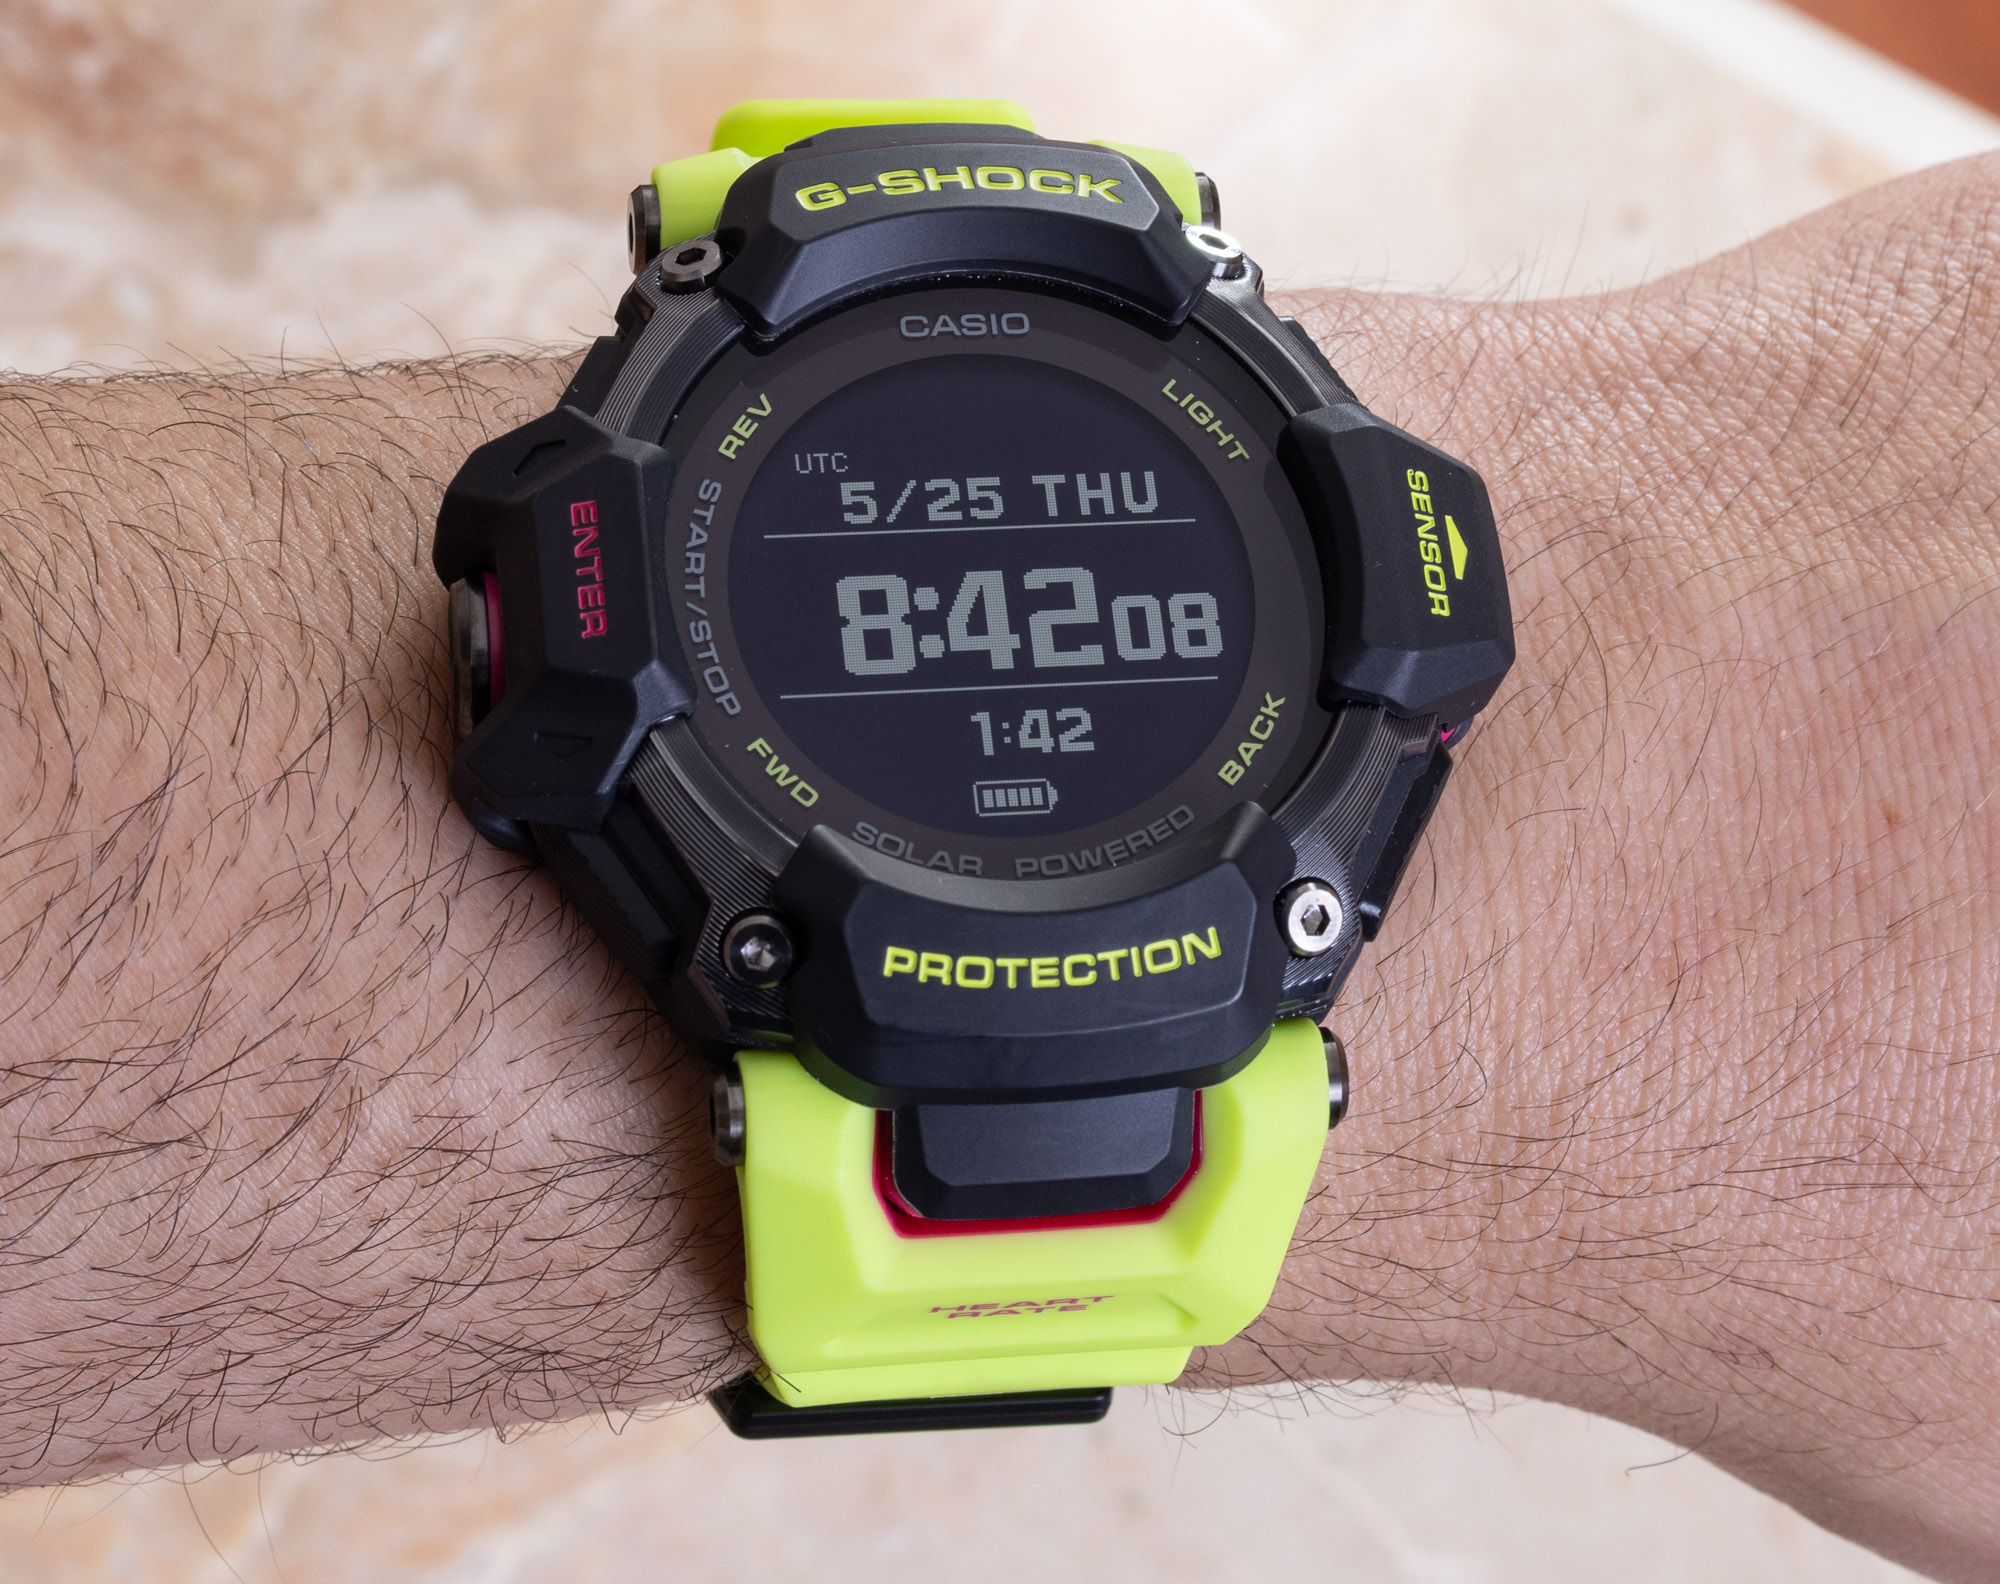 Watch Review: Casio G-Shock Move GBD-H2000 Smart Activity Tracker |  aBlogtoWatch